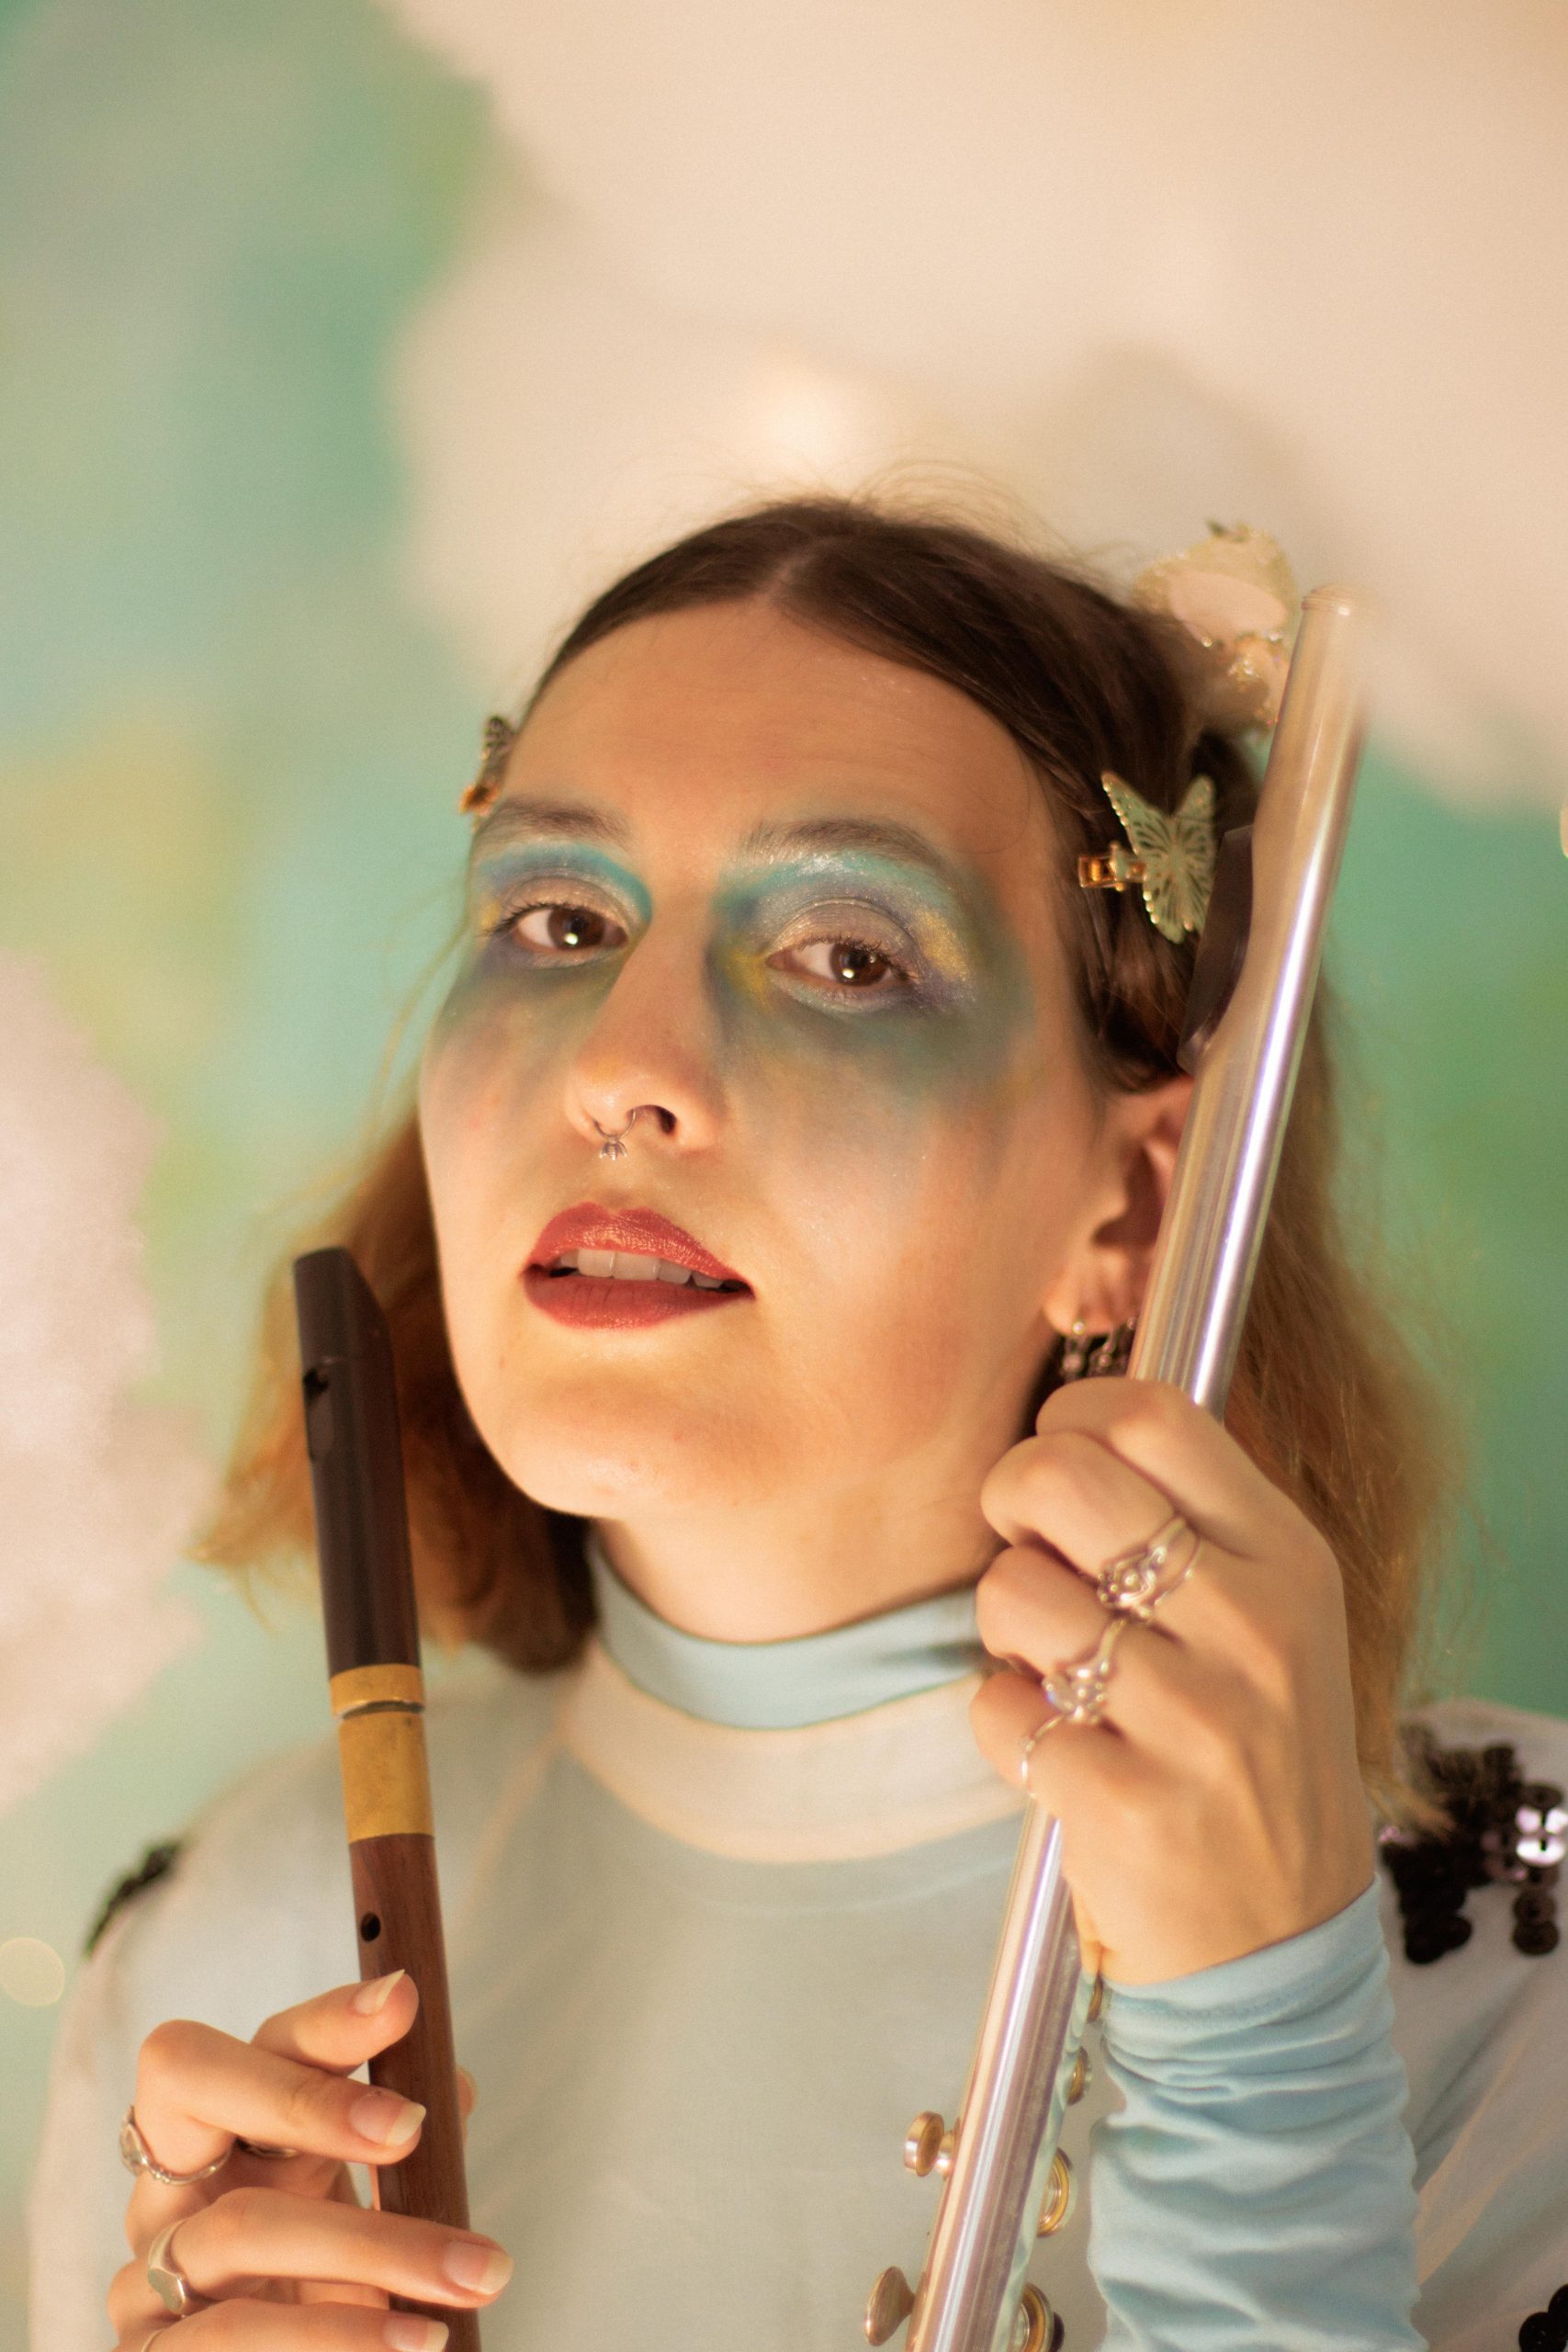 A photo of the Emerald Ruby, posing with a silver flute in one hand and a wooden recorder in the other. She has fair skin, shoulder length brown hair with butterfly clips, and is wearing pink lipstick and blue and gold eyeshadow in an angelic style. She is wearing a light blue and white turtleneck shirt, standing in front of a background of clouds and blue/green colours that had been staged in the background.